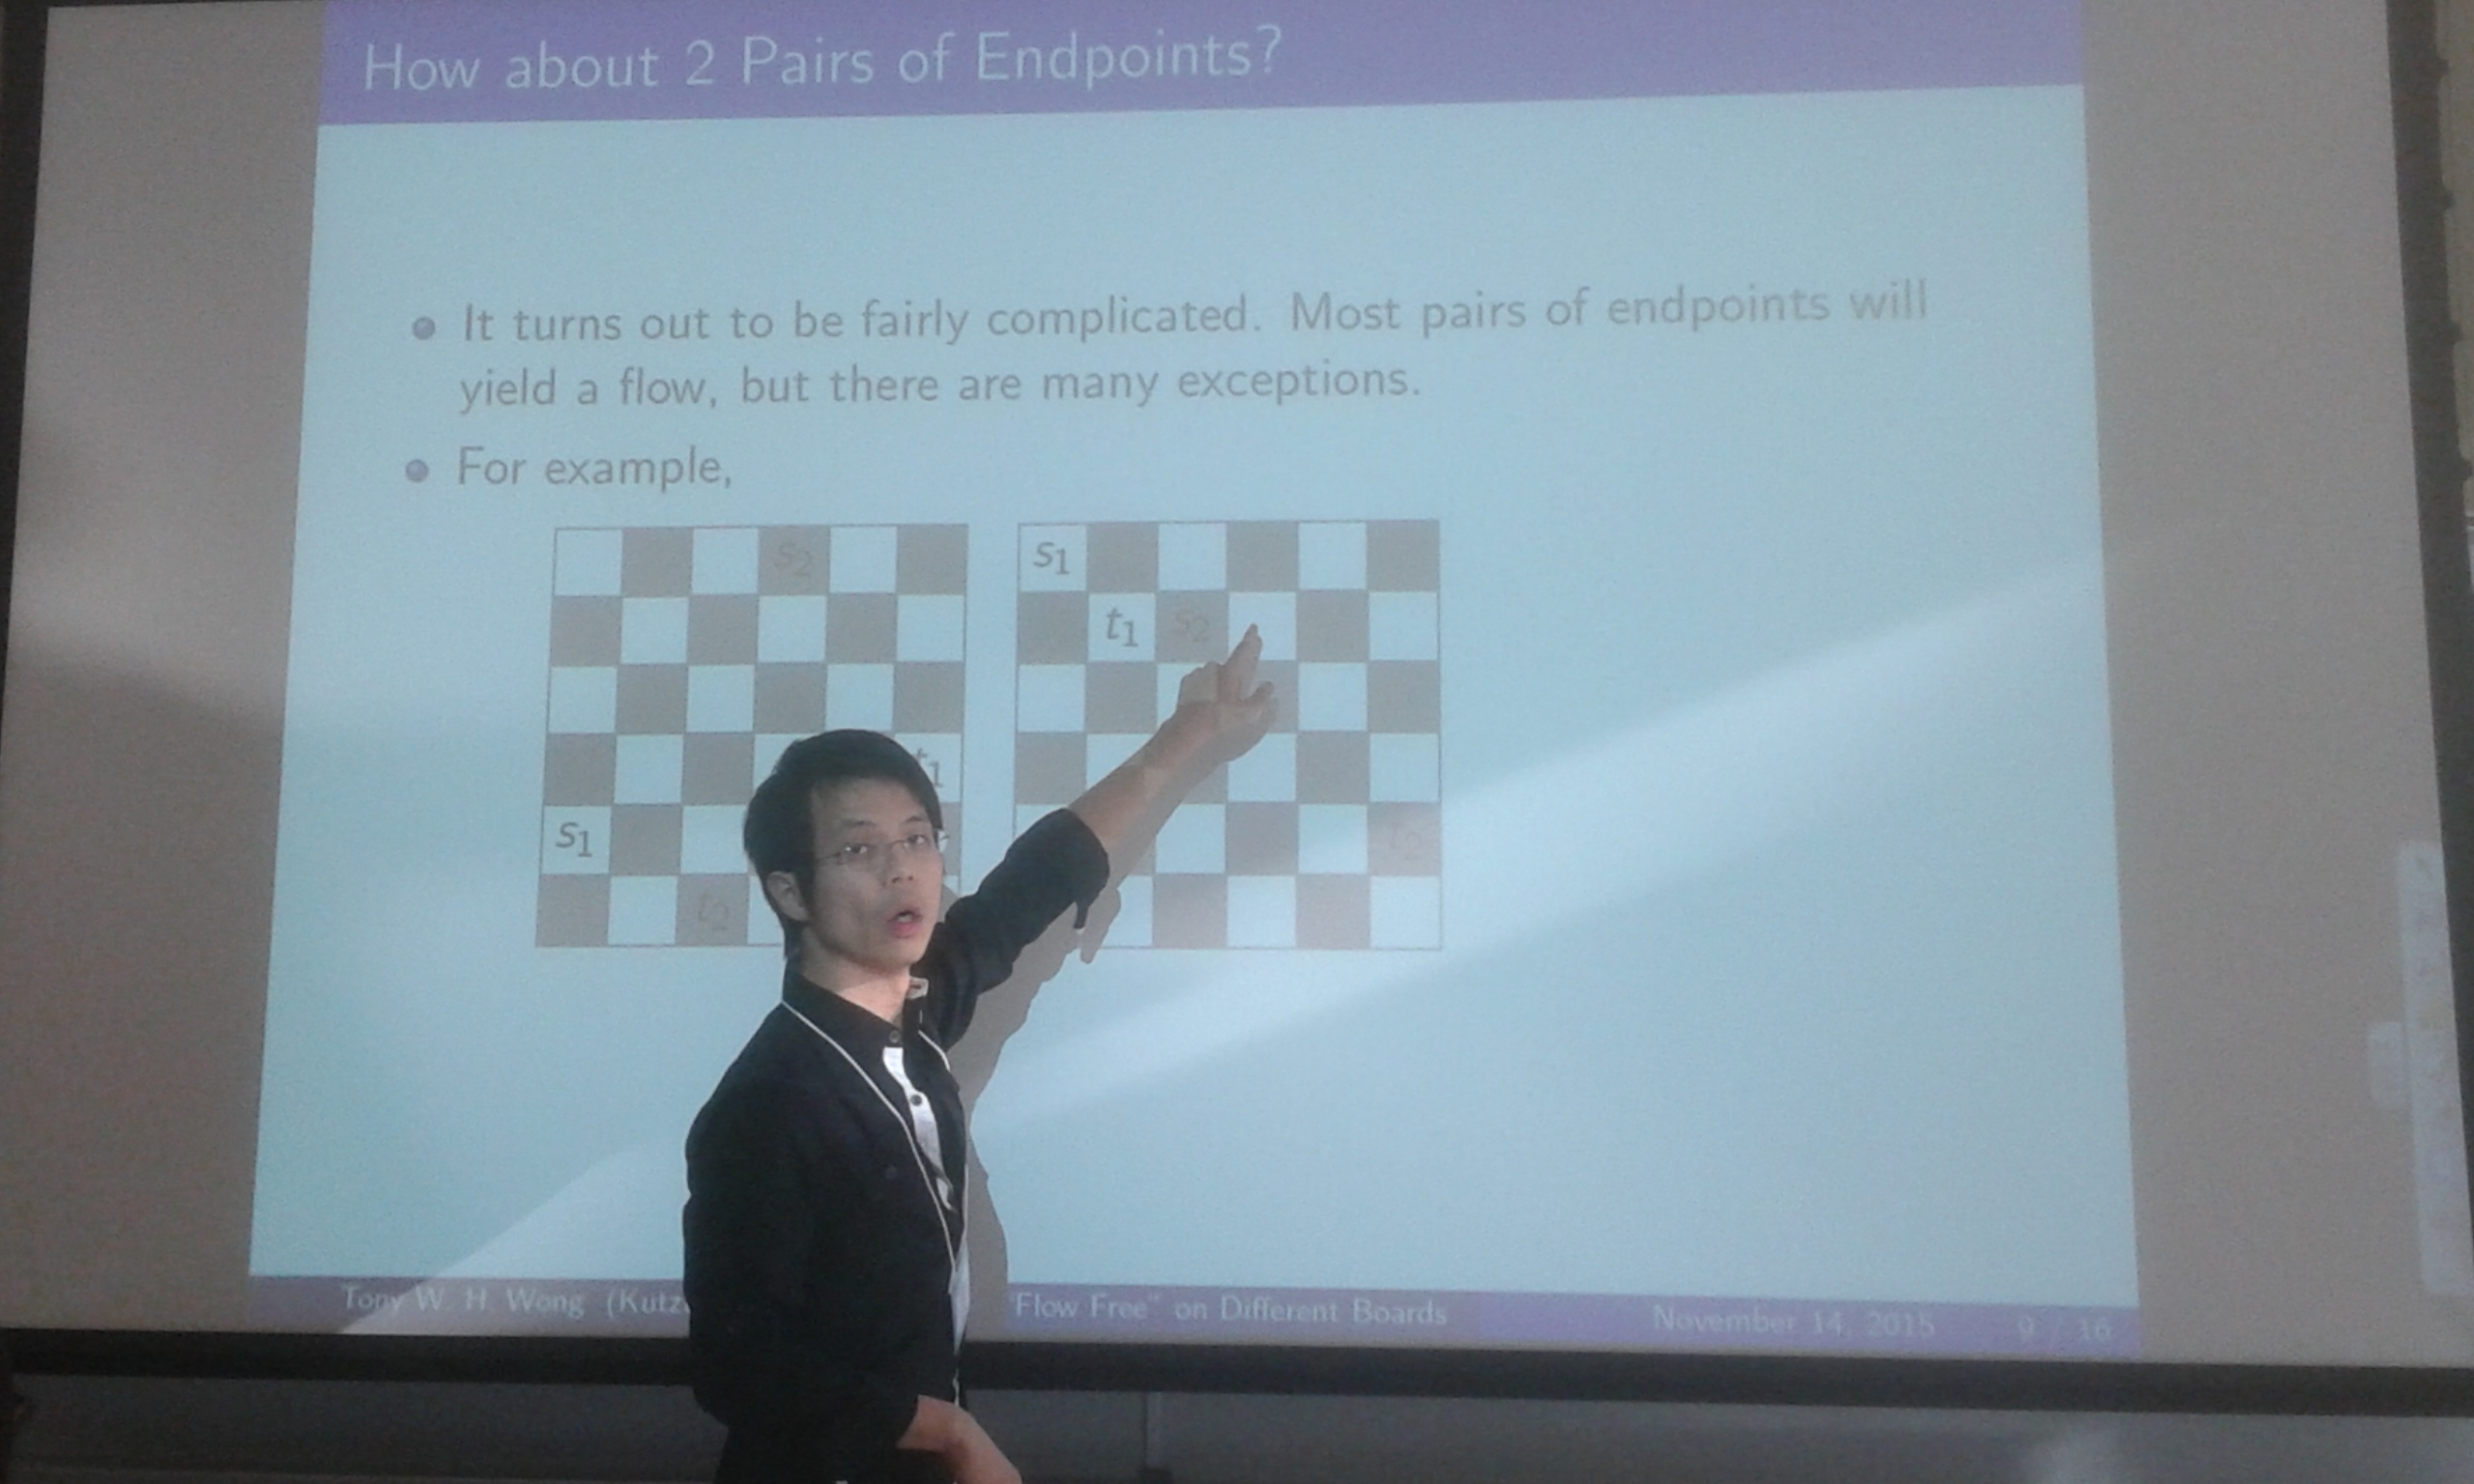 Dr. Wong presenting at a conference